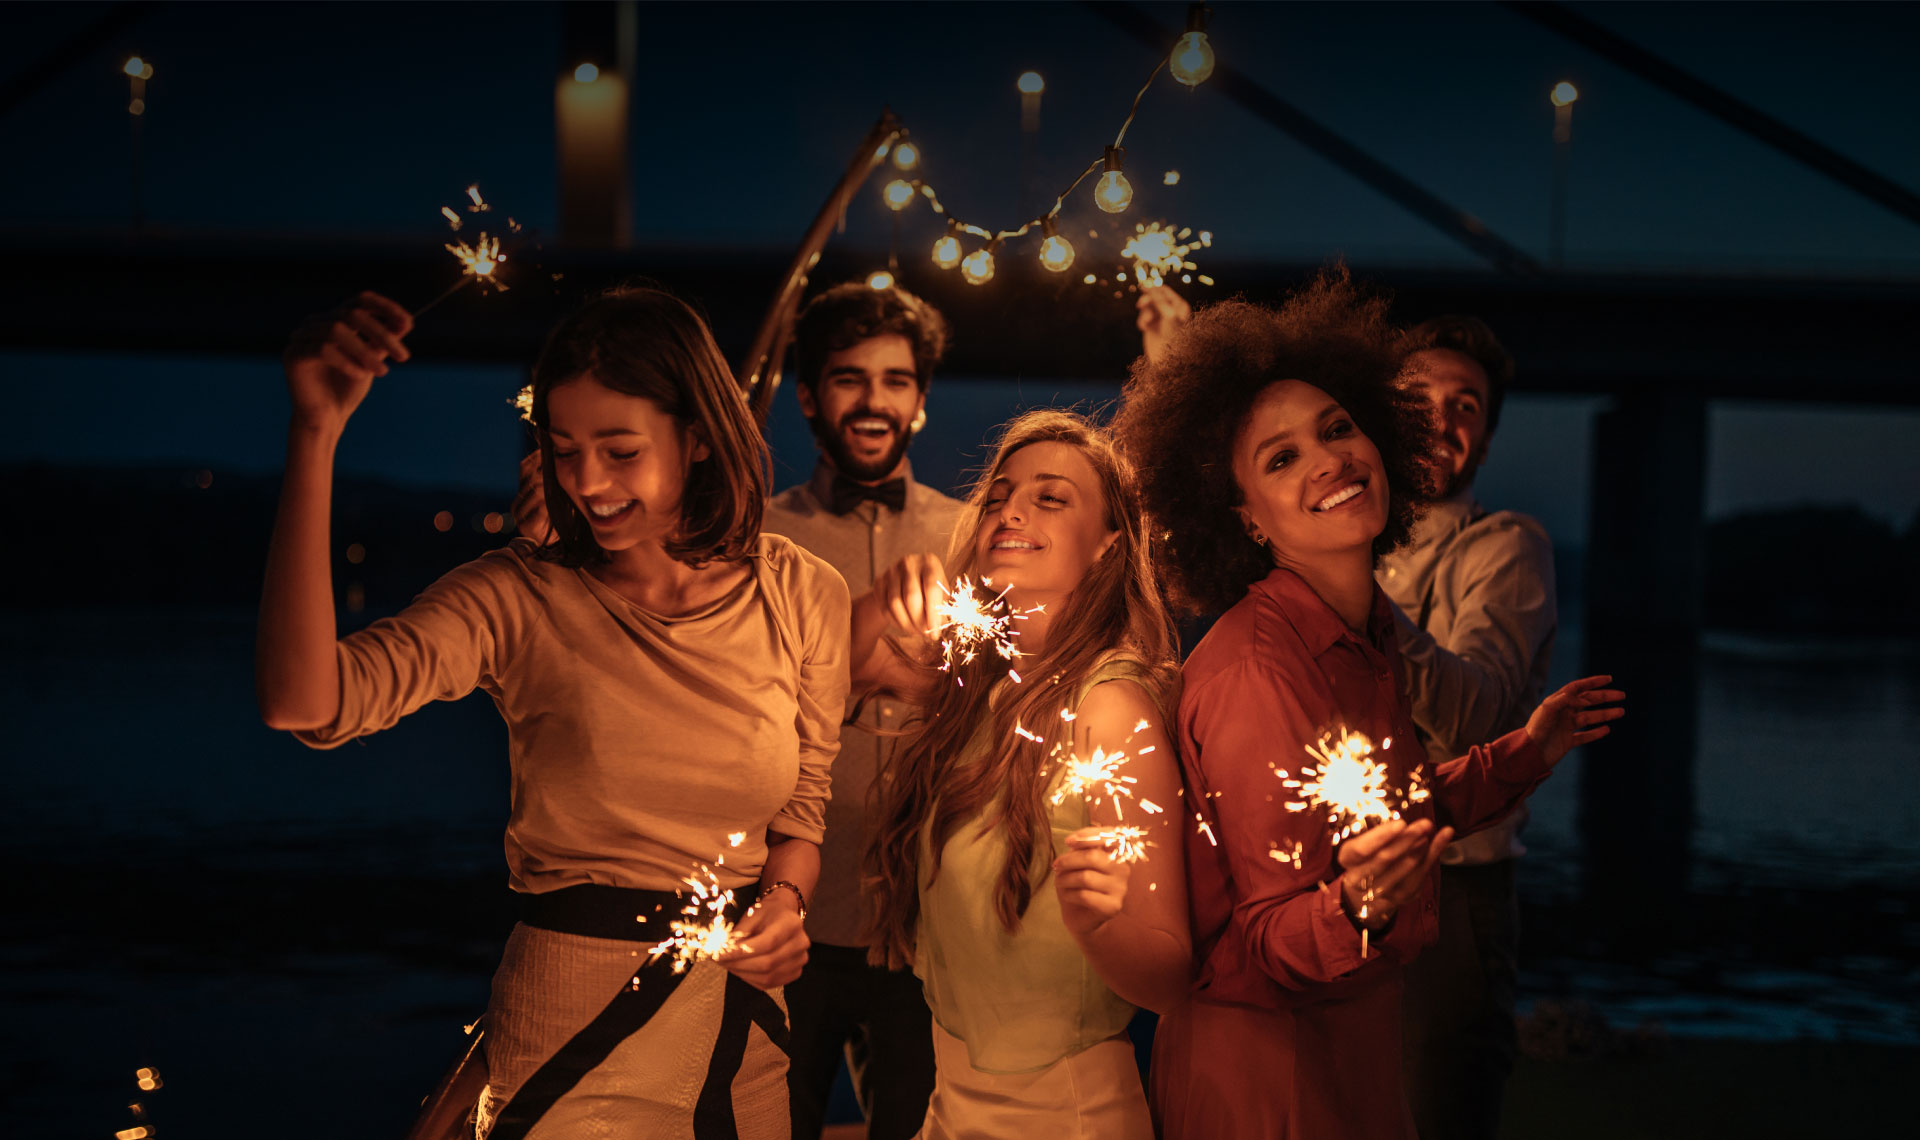 Five friends with sparklers dancing on the beach at night.